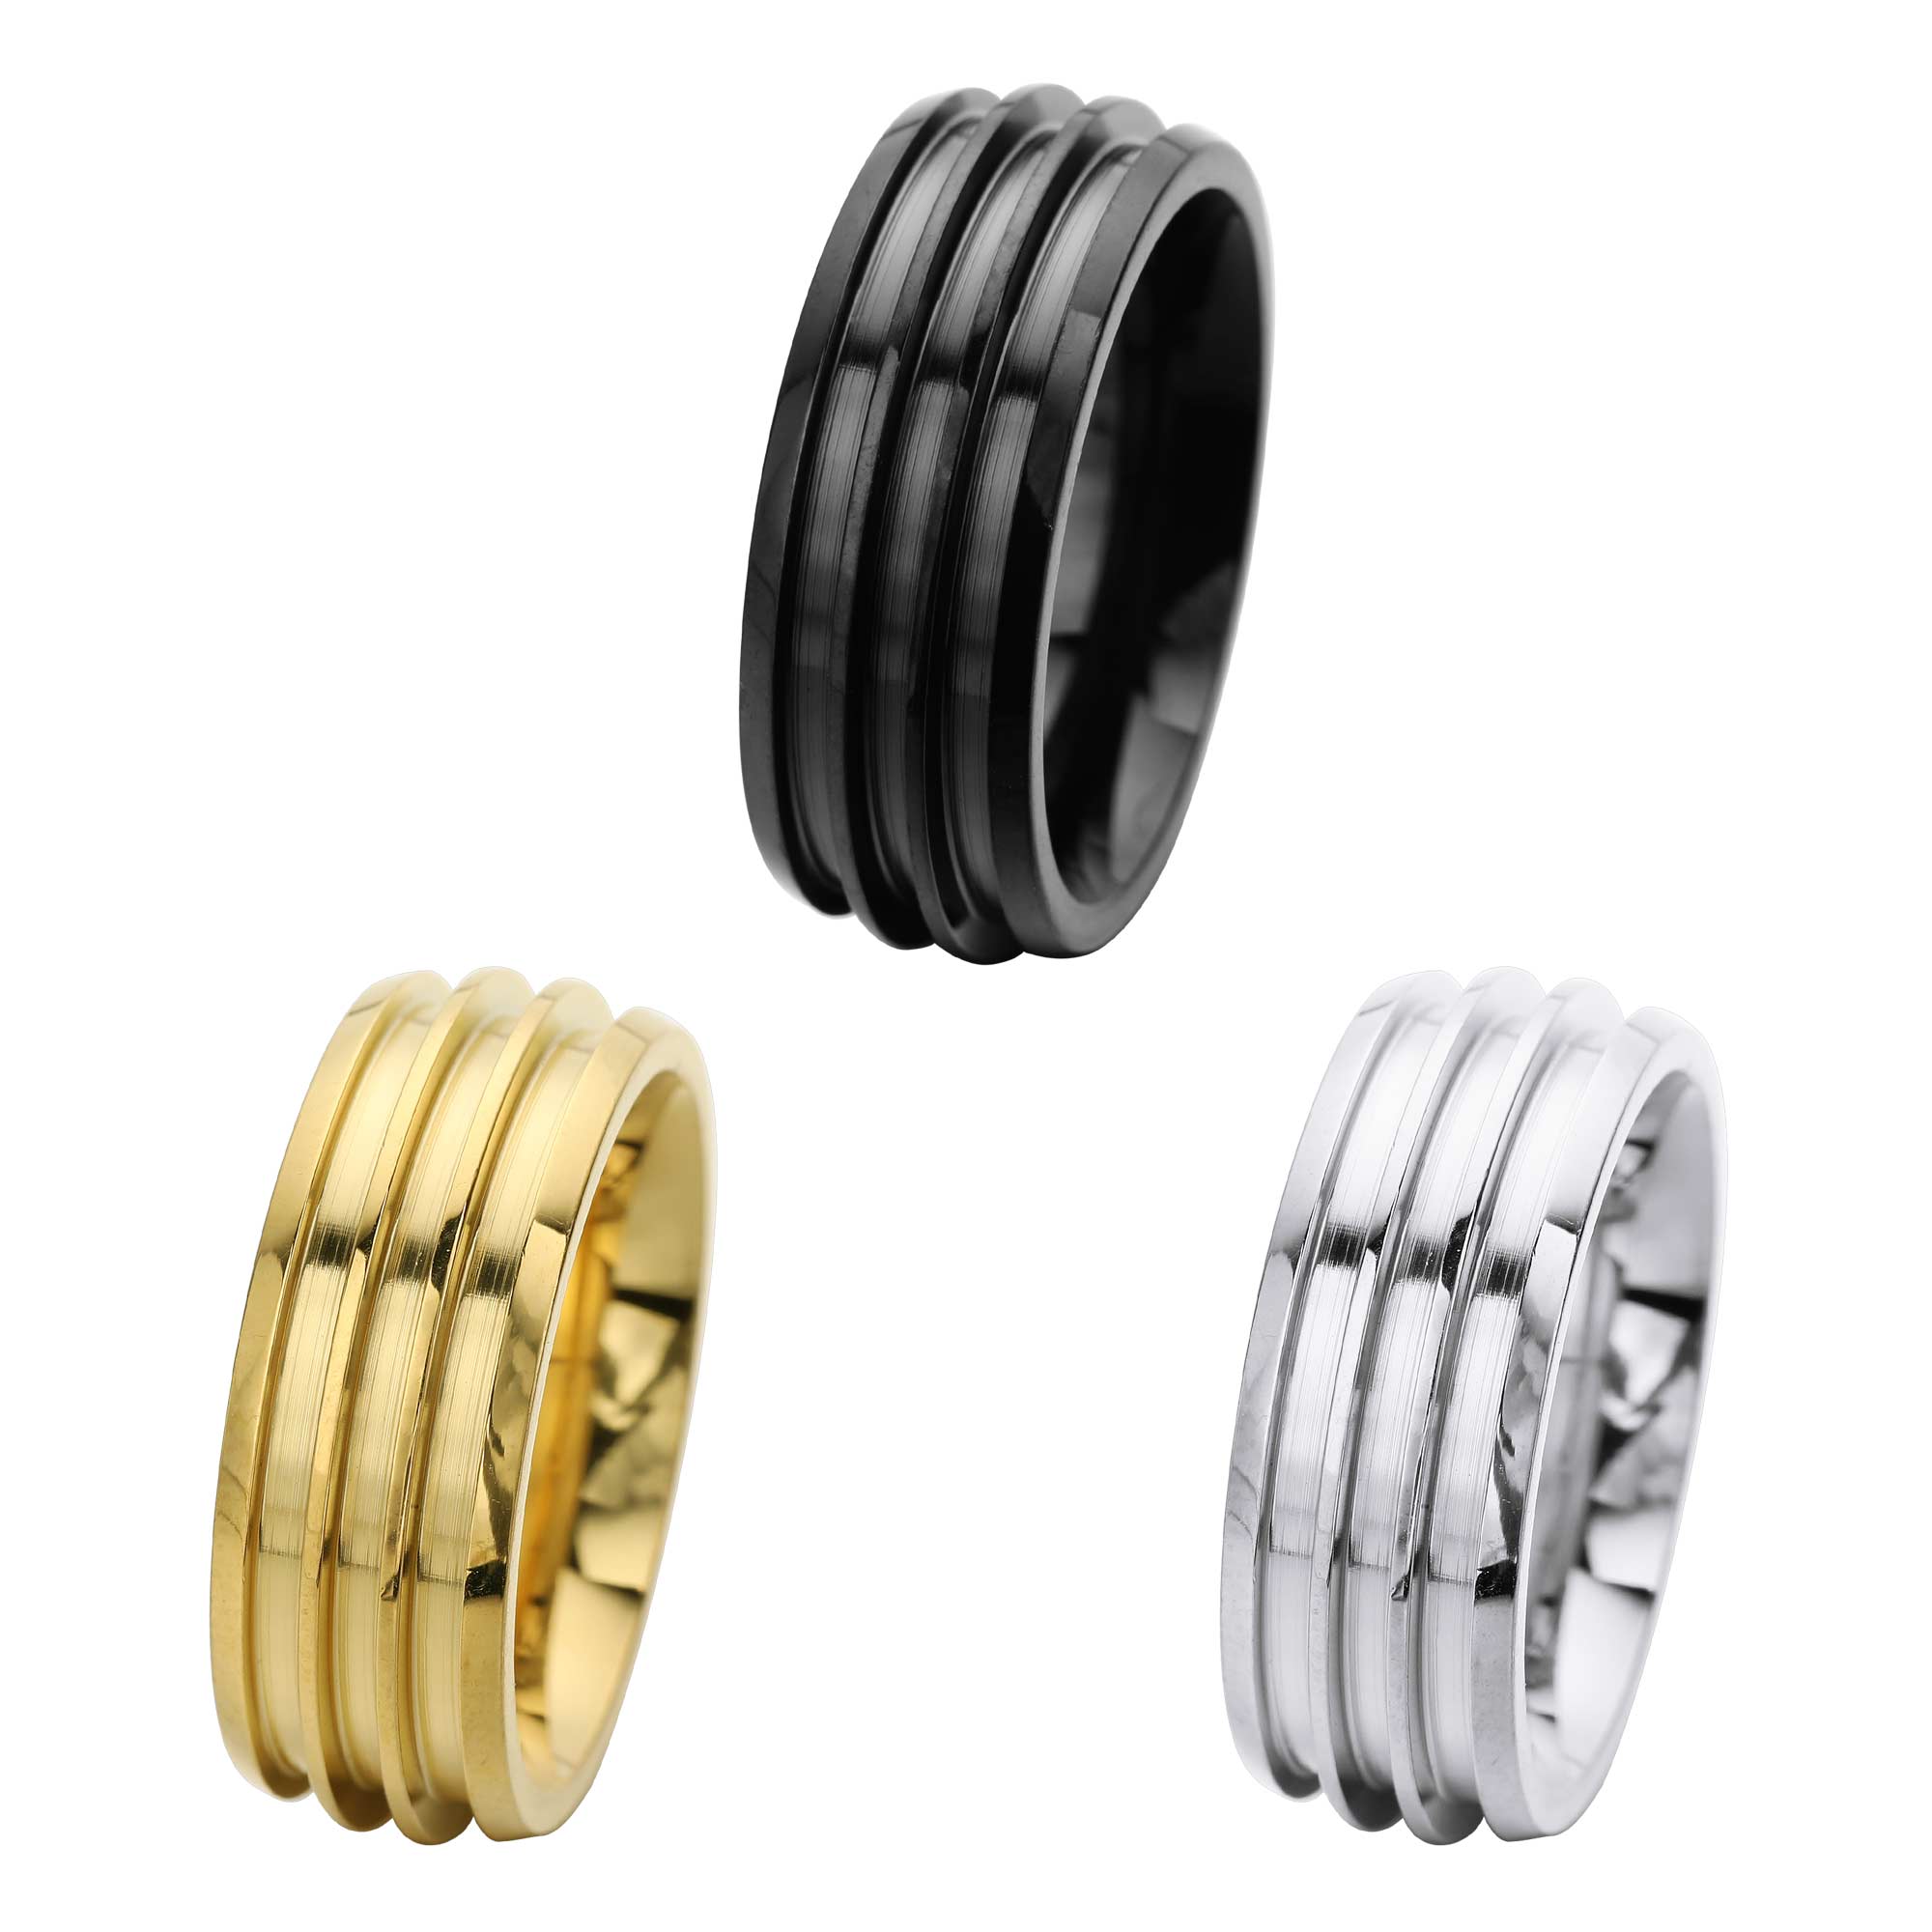 Keepsake Mens' Resin Ashes Channel Ring Settings,Three Channel Bezel Stainless Steel Ring Setting,Silver Gold Black DIY Ring Supplies,1.3MM Width Each Channel 1294592 - Click Image to Close